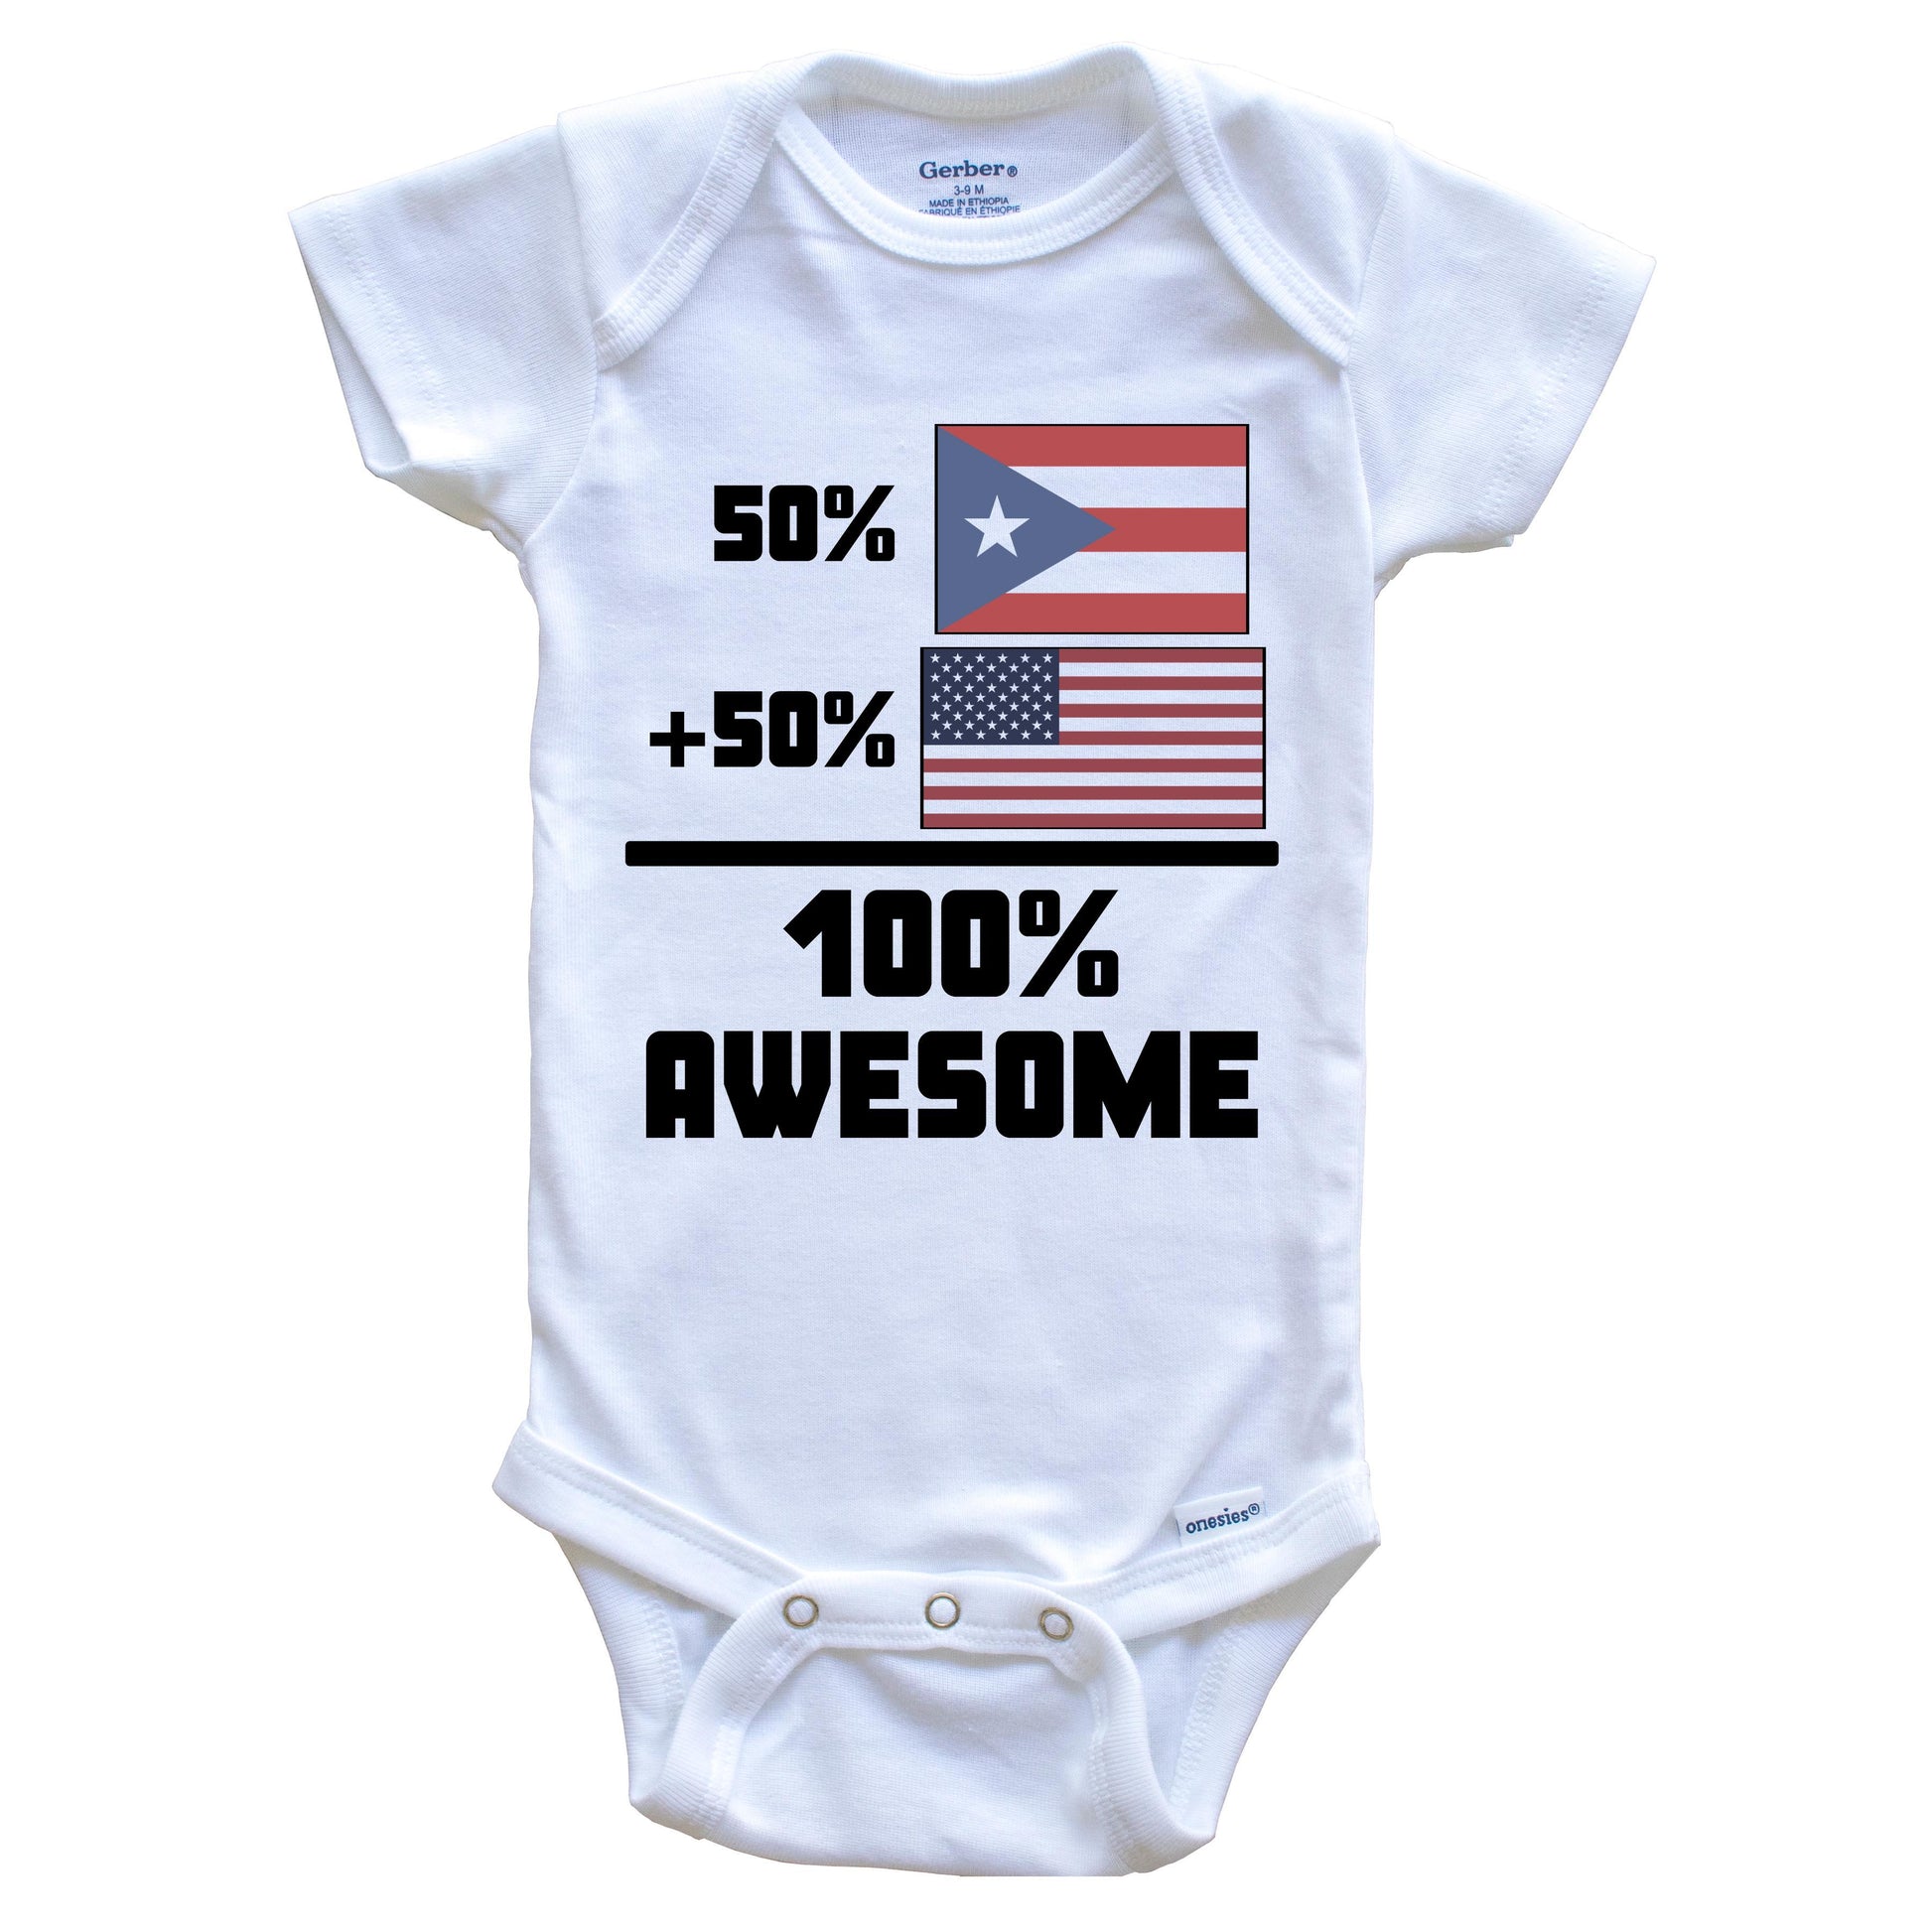 50% Puerto Rican 50% American 100% Awesome Funny Flag Baby Onesie